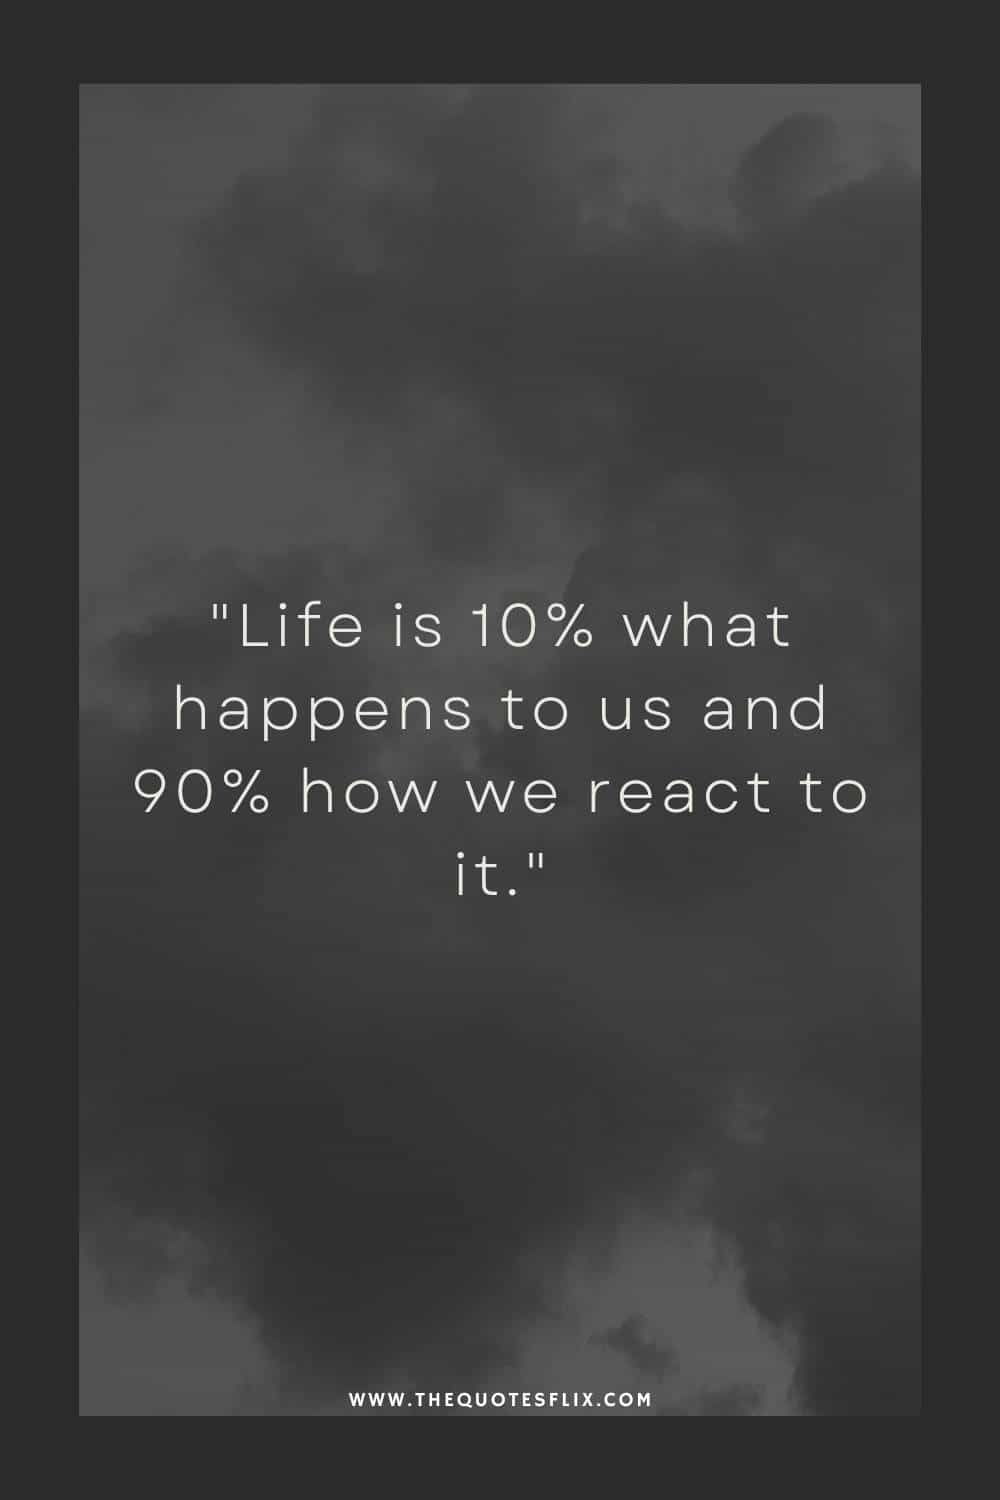 cancer survivor quotes - life is what happens and how we react